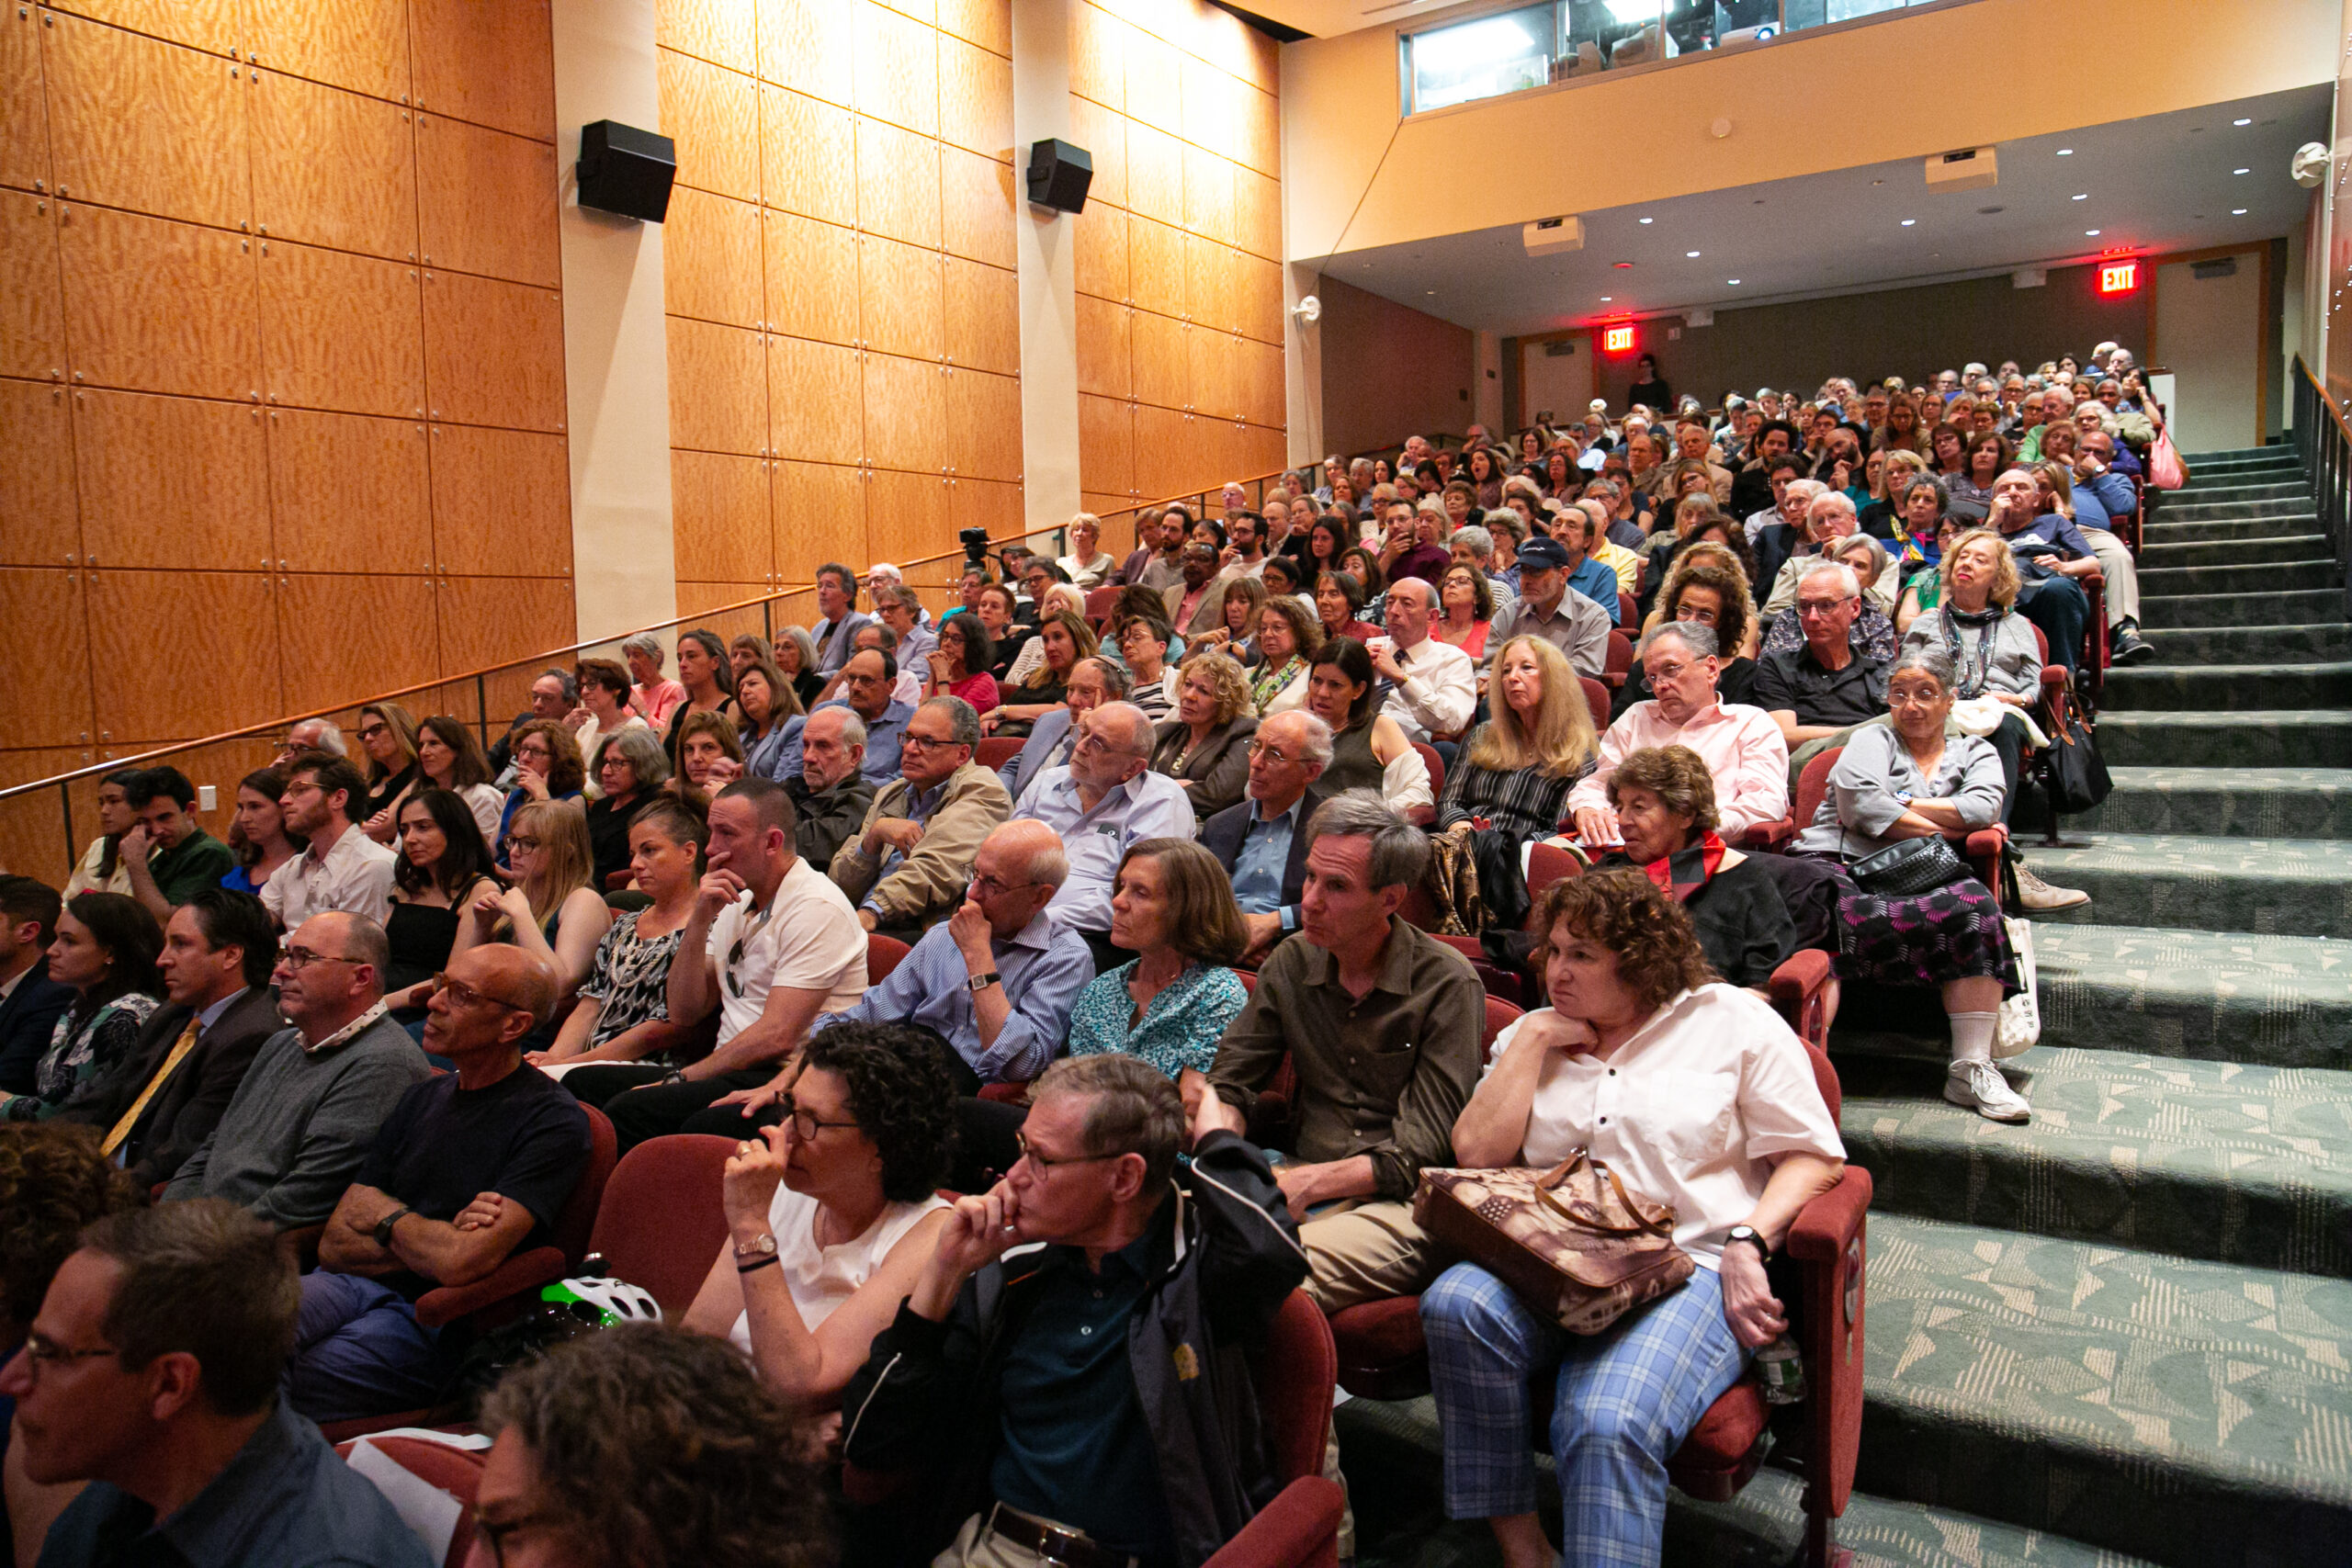 Audience at June 11, 2019 launch event for "An Innocent Bystander" at the Center for Jewish History